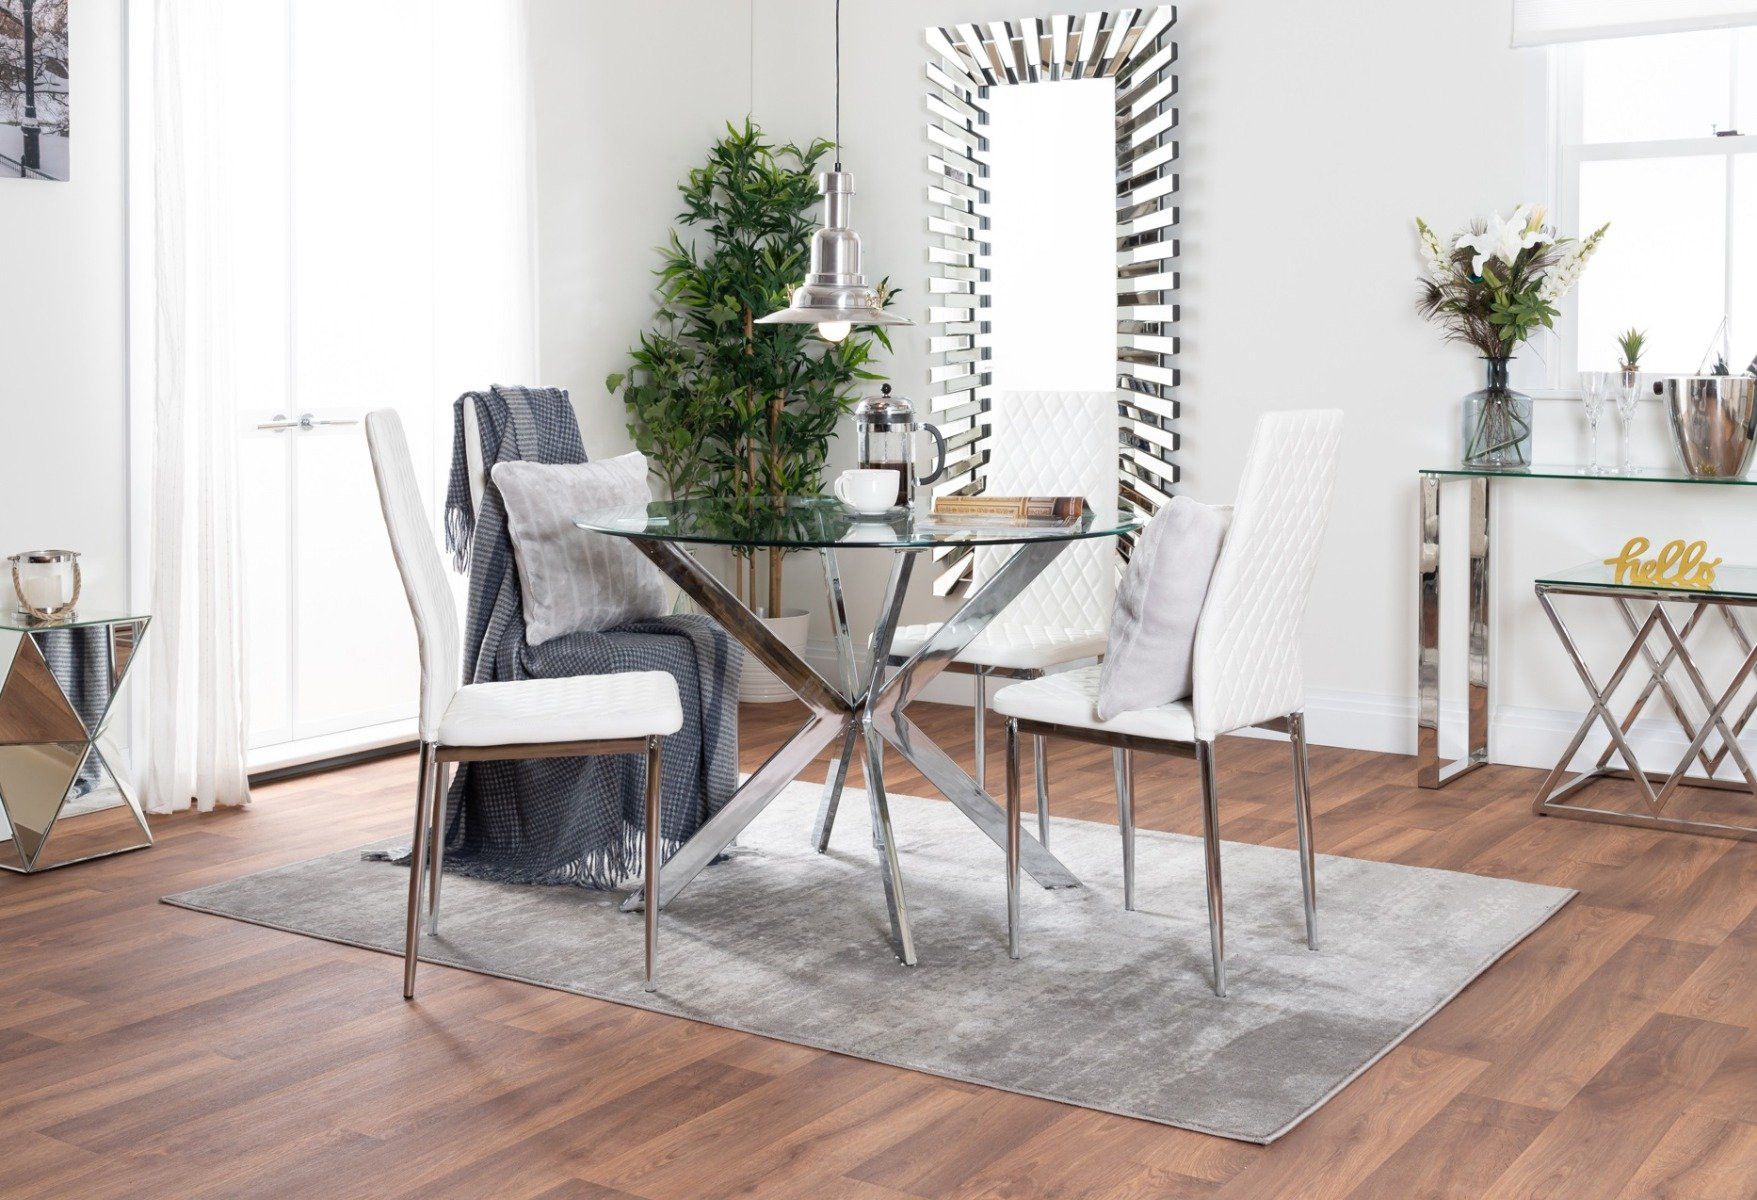 Venice Glass Chrome Table & 4 Milan Chairs | Furniturebox For Milan Glass Tv Stands (View 14 of 15)